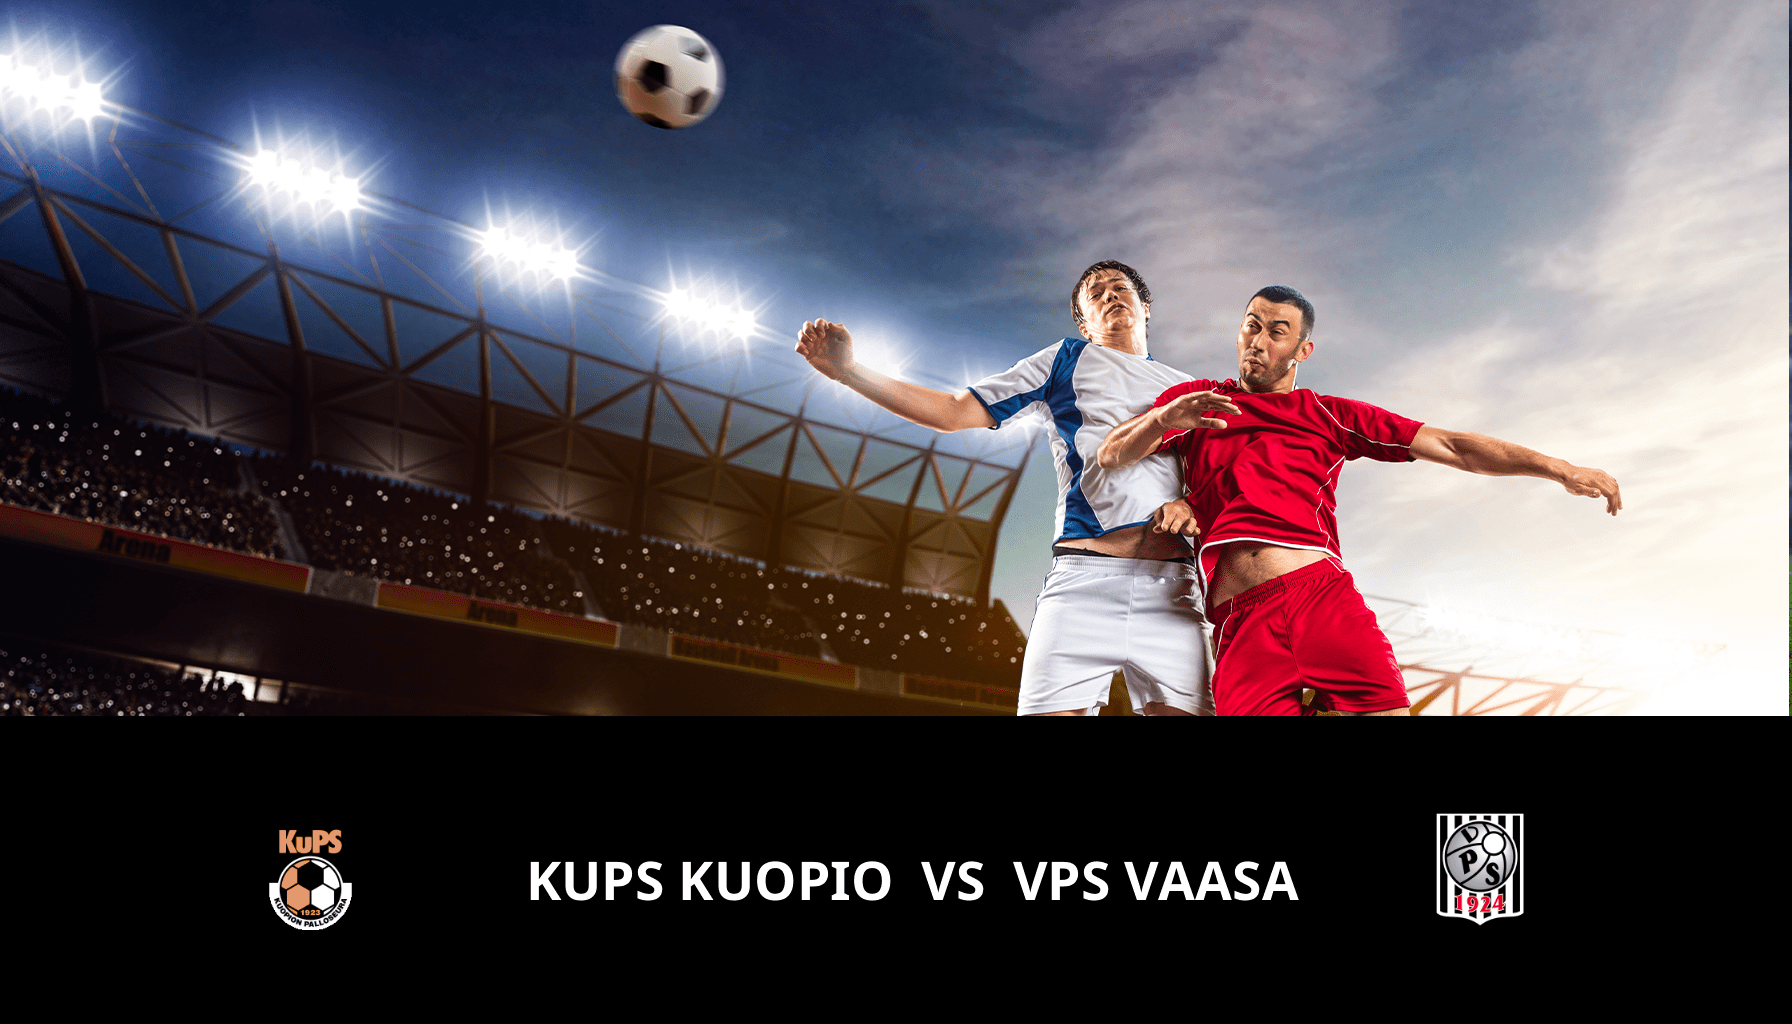 Previsione per KuPS VS vaasa PS il 10/05/2024 Analysis of the match